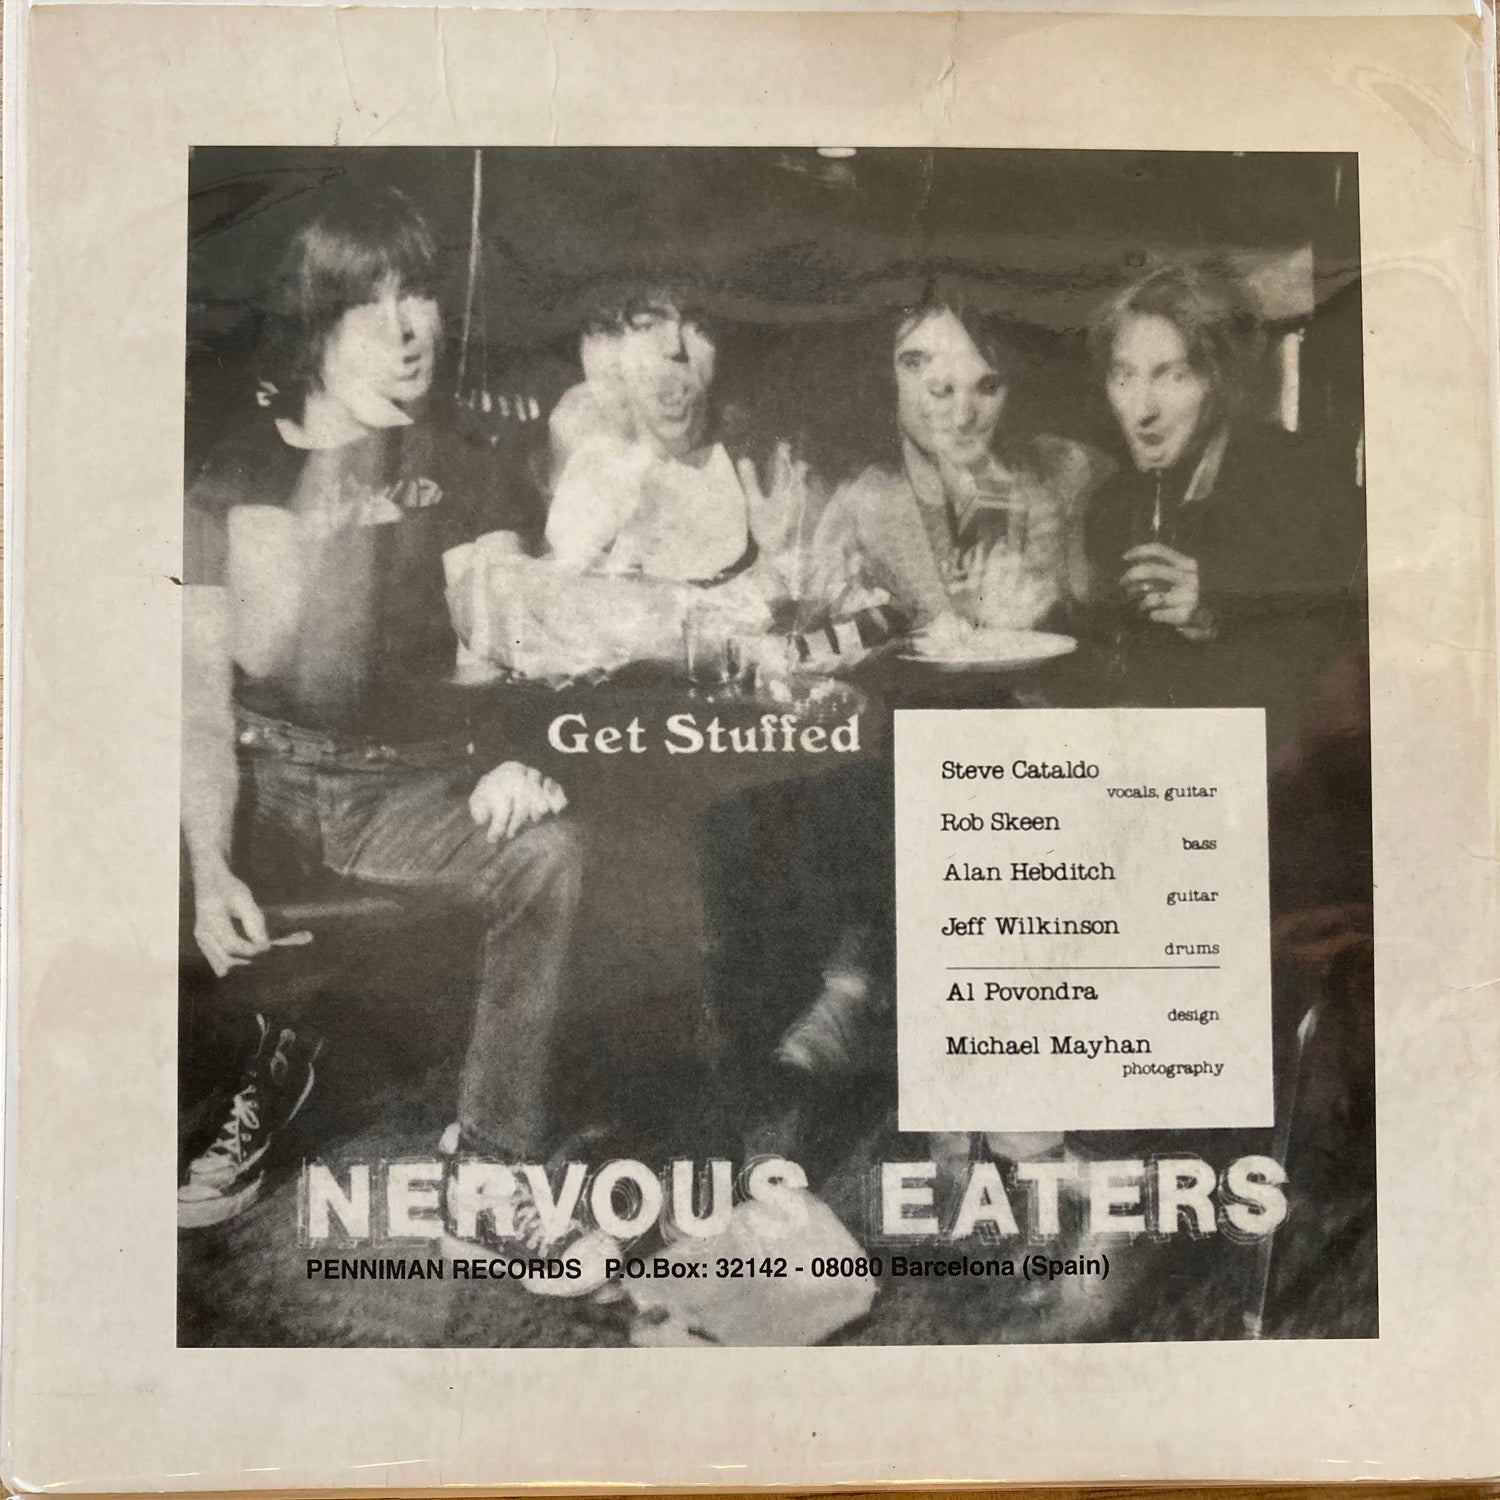 Just Head - Nervous Eaters (7")